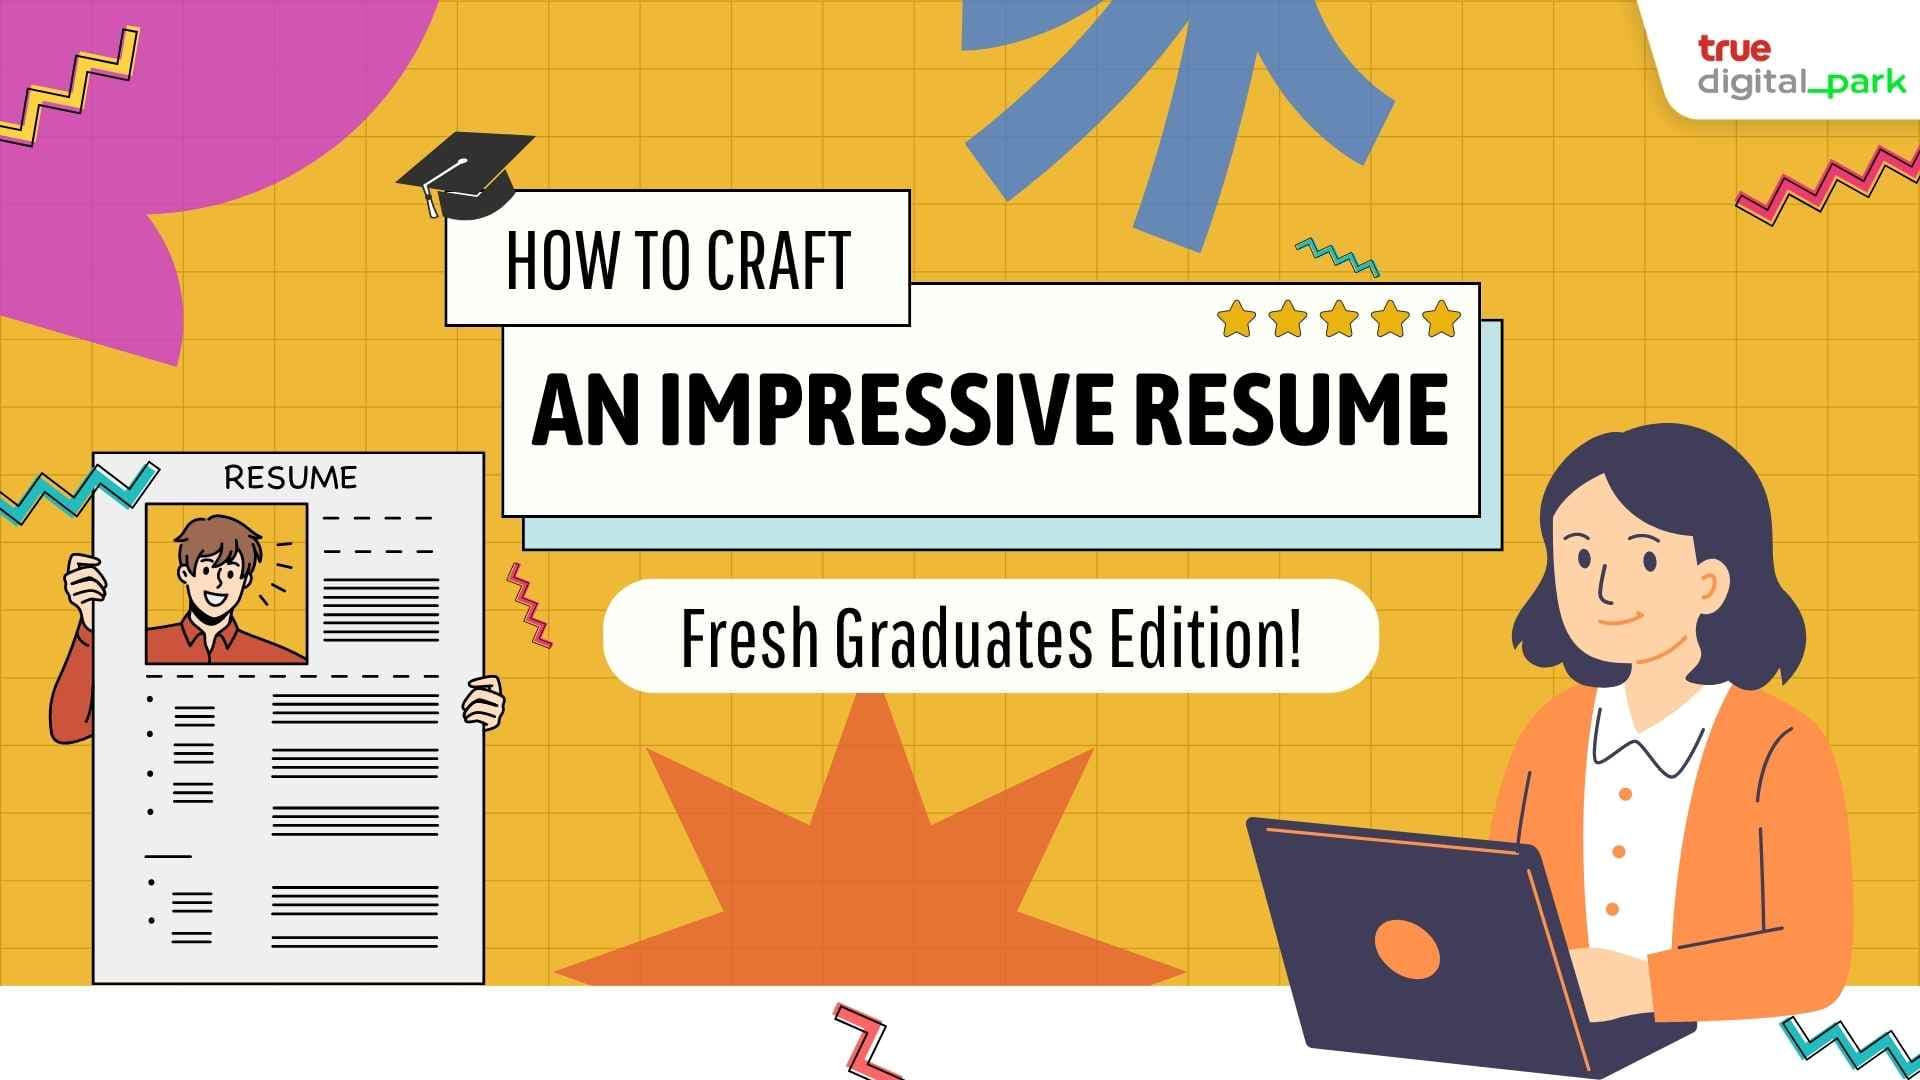 The Do’s and Don’ts to craft an impressive resume – Fresh Graduates Edition